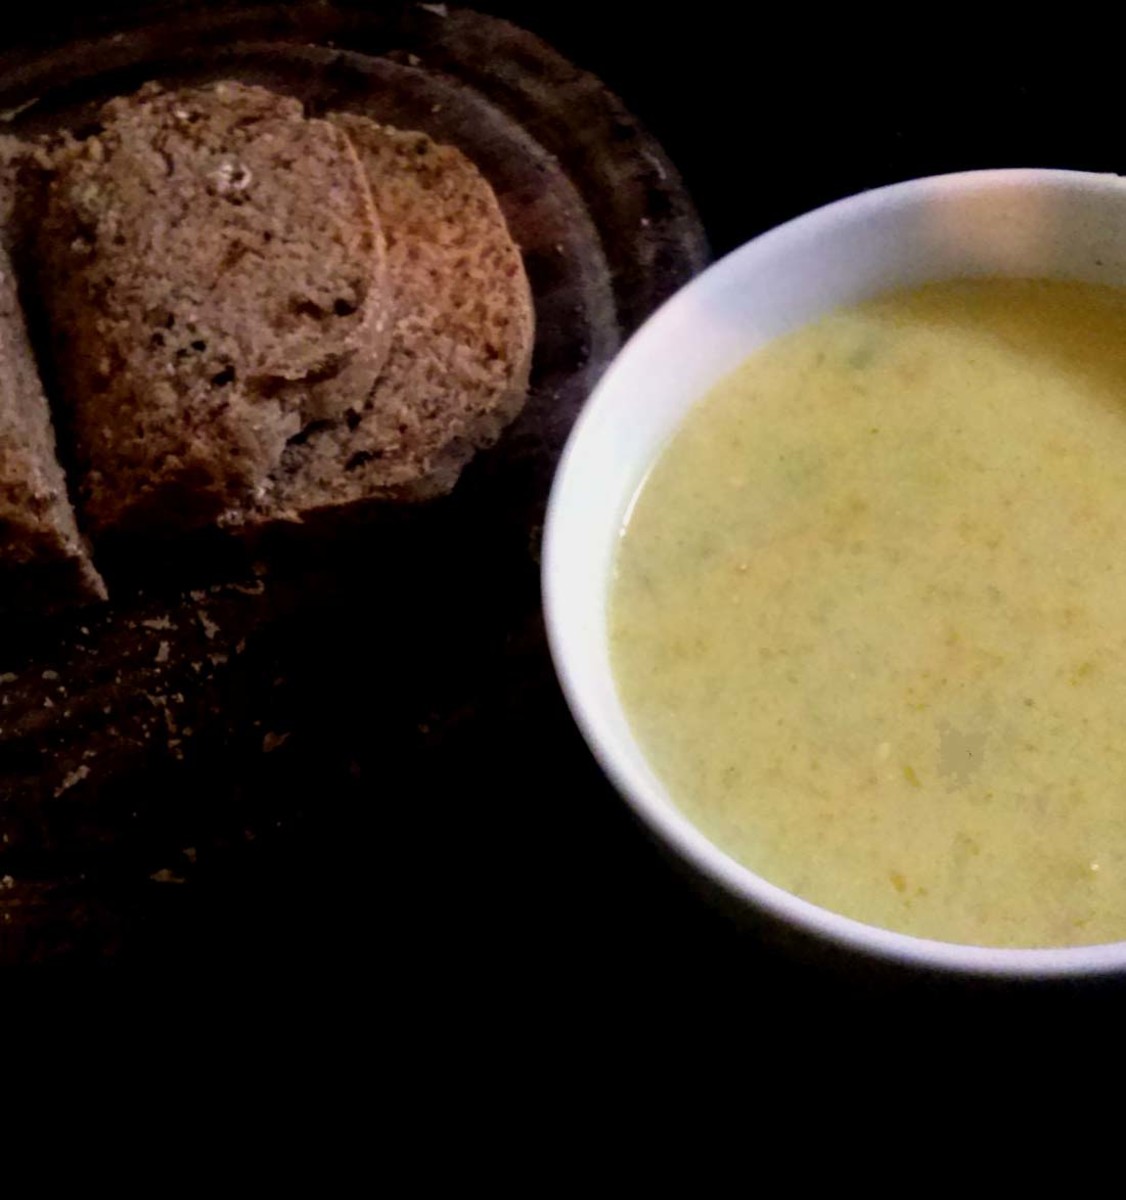 Creamy celery soup with home-baked multigrain bread